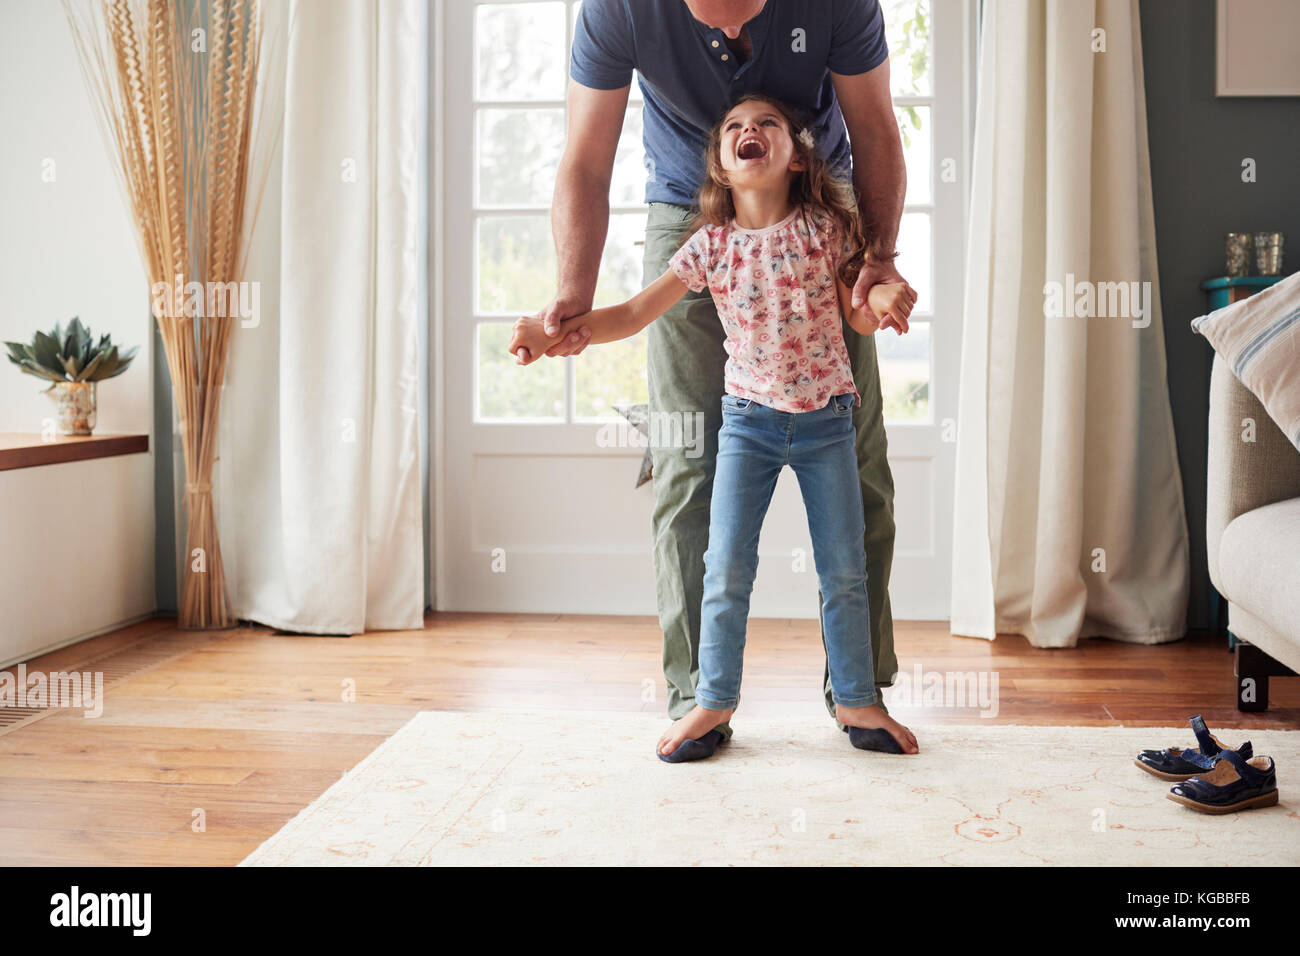 Girl balancing on father’s feet at home, looking up Stock Photo